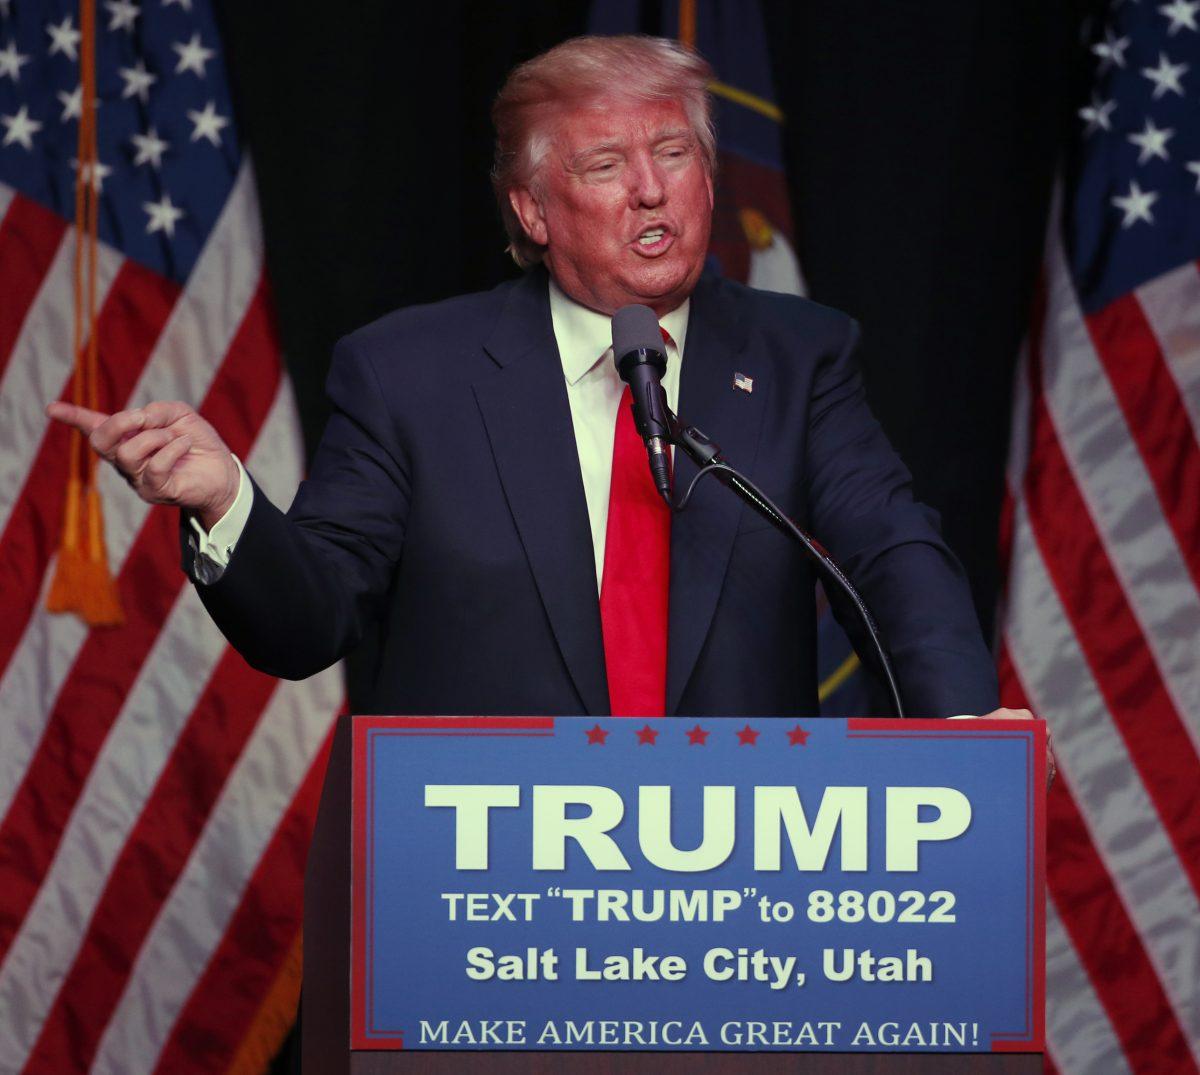 Republican presidential candidate Donald Trump at the Infinity Event Center in Salt Lake City on March 18, 2016. (George Frey/Getty Images)